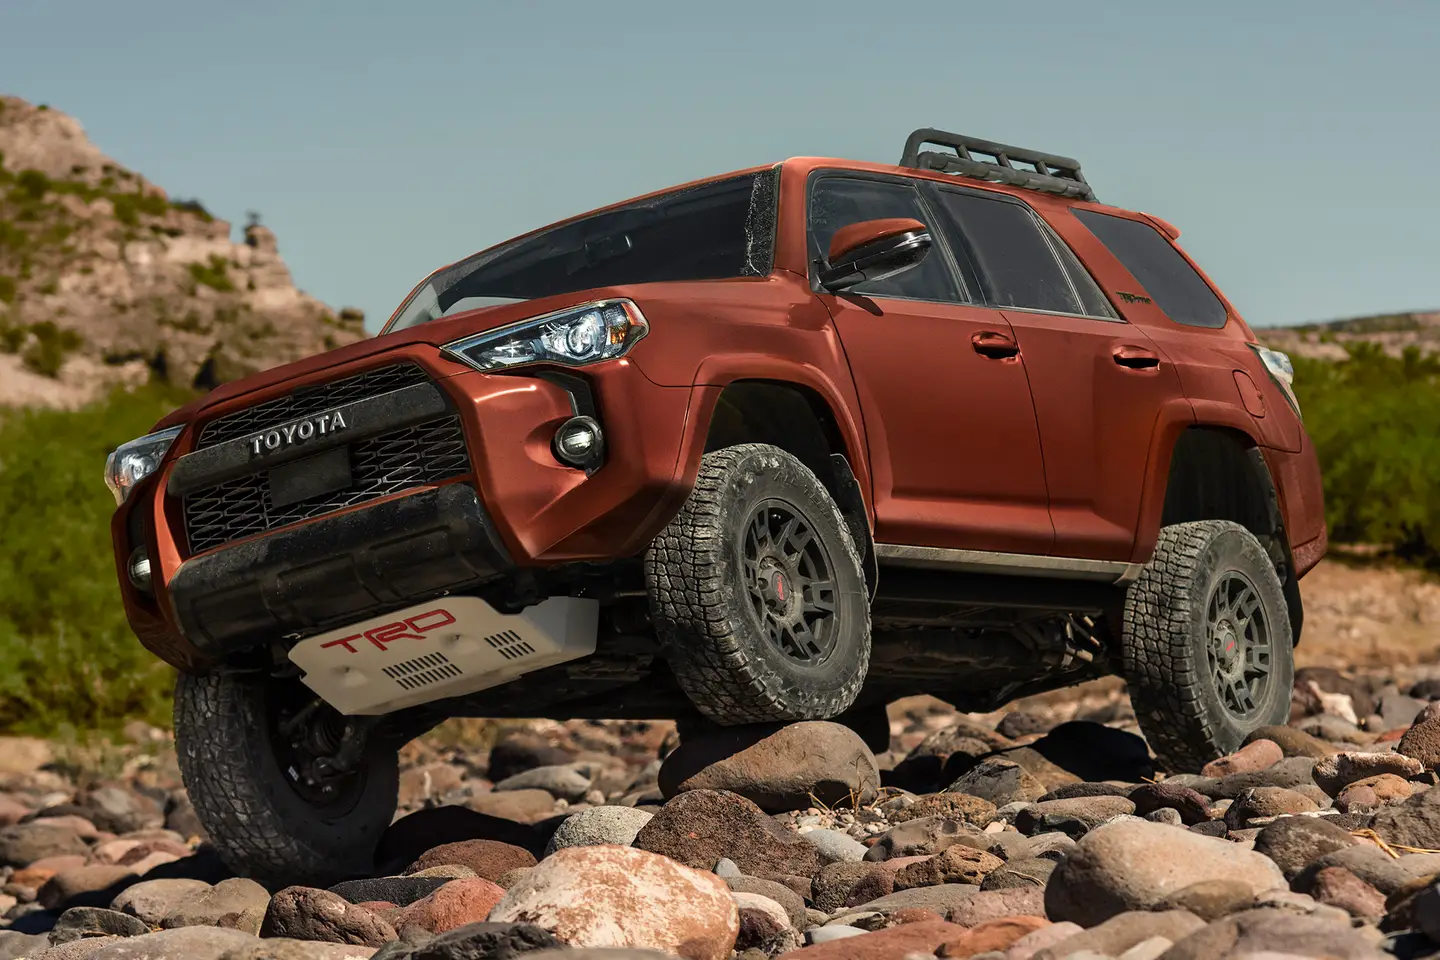 Even though a new model has come out, older Toyota 4Runners are still selling well